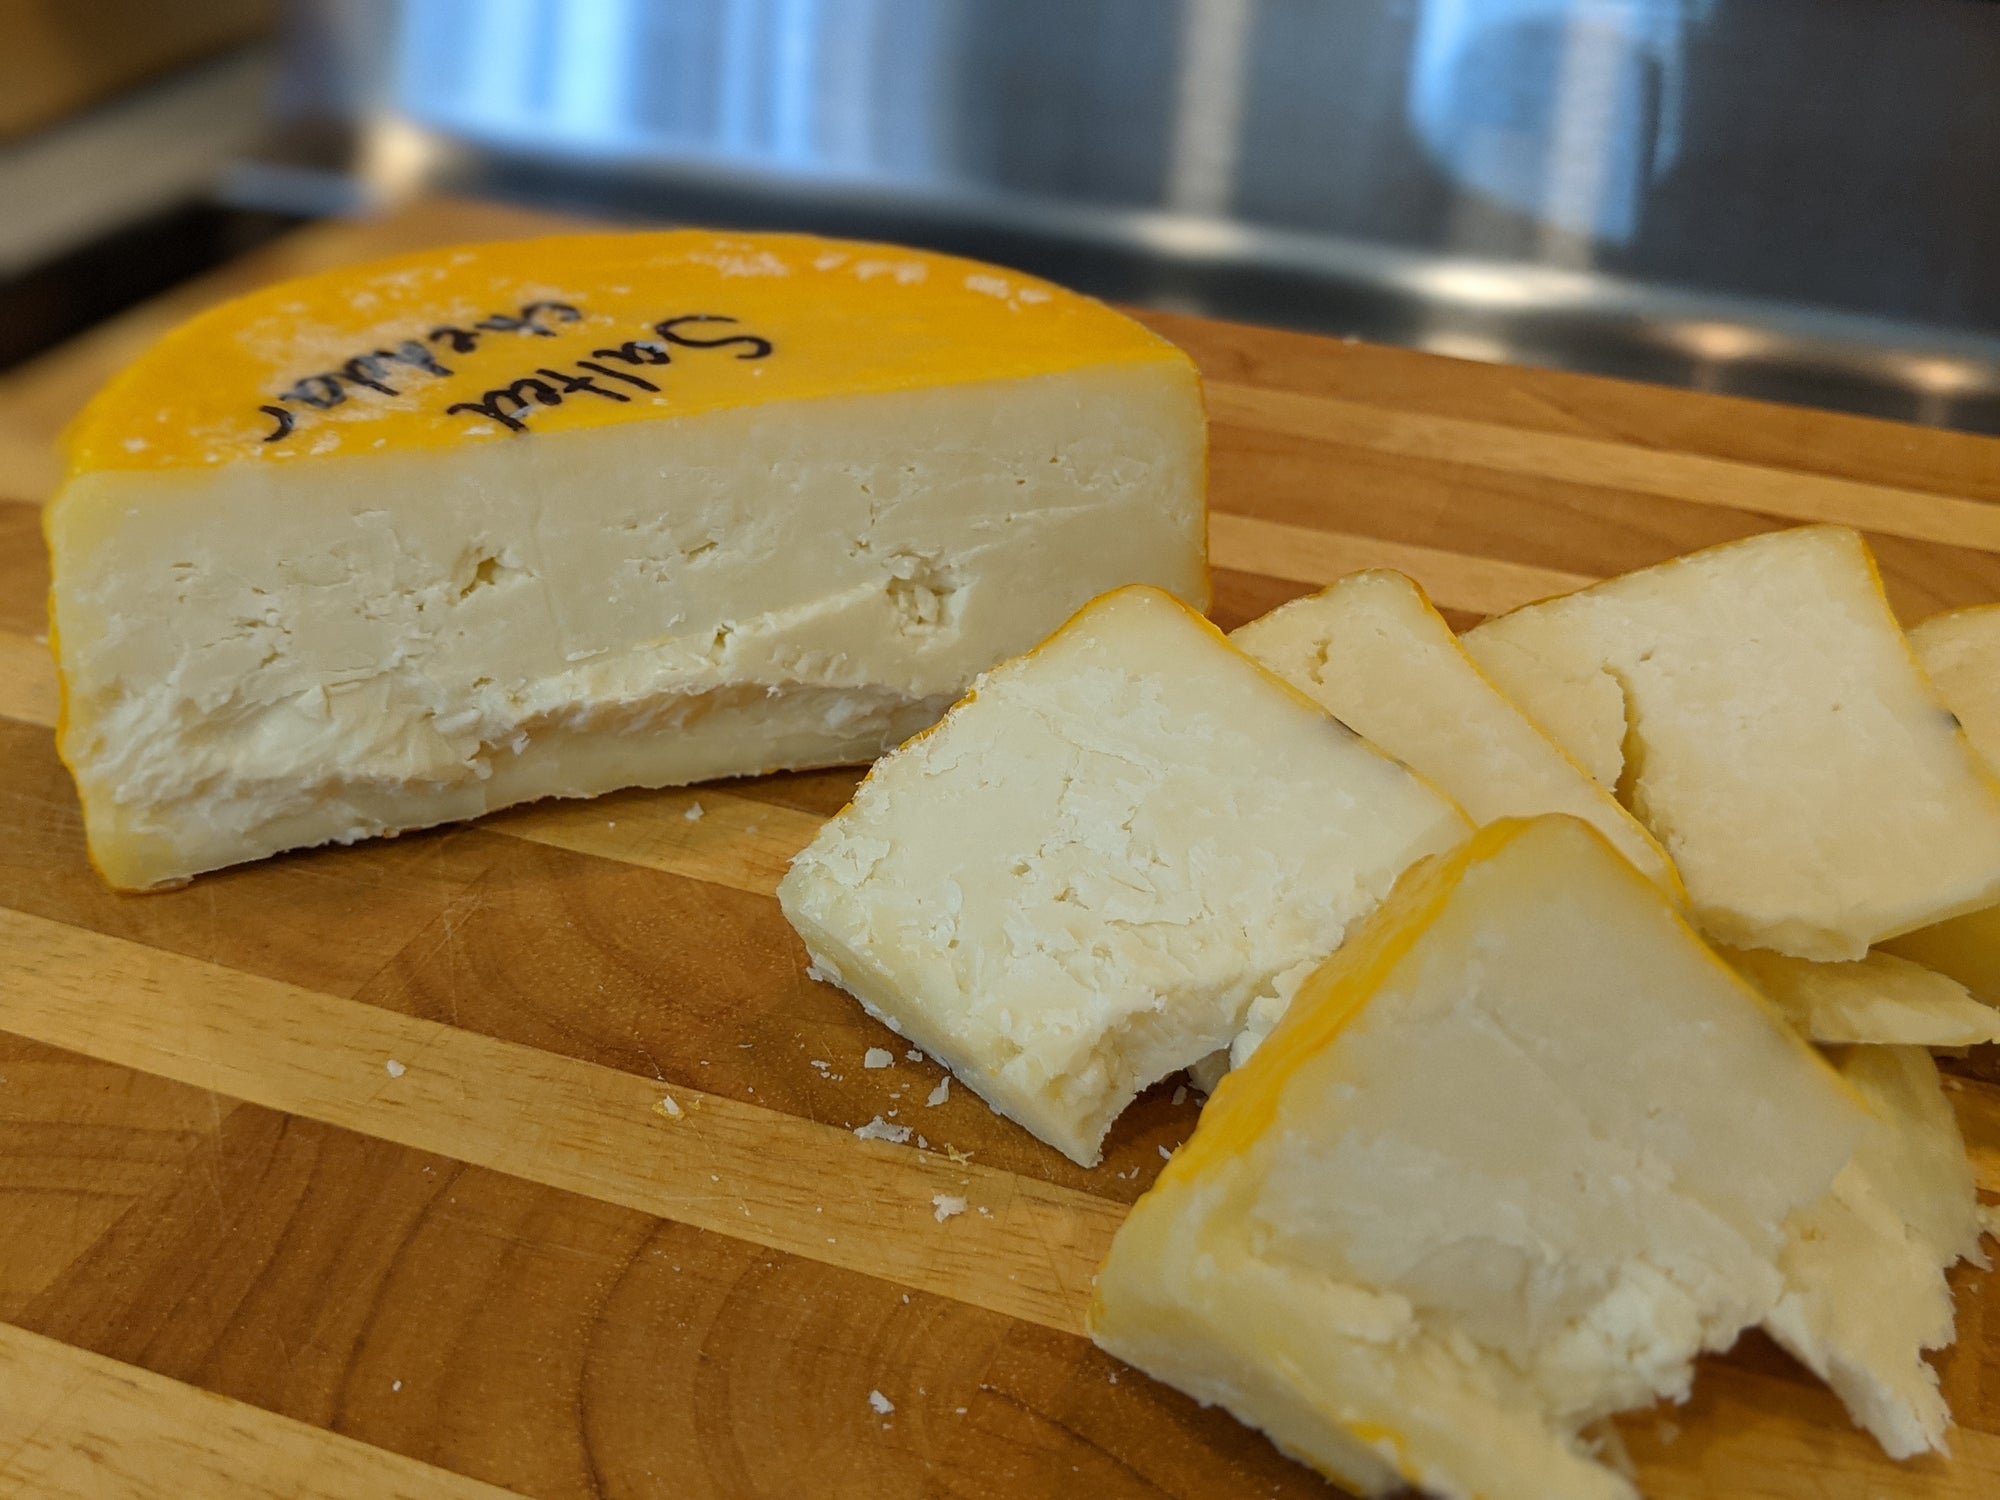 Which Cheese would you like to make? Staff Picks of Our Favorite DIY Cheeses!